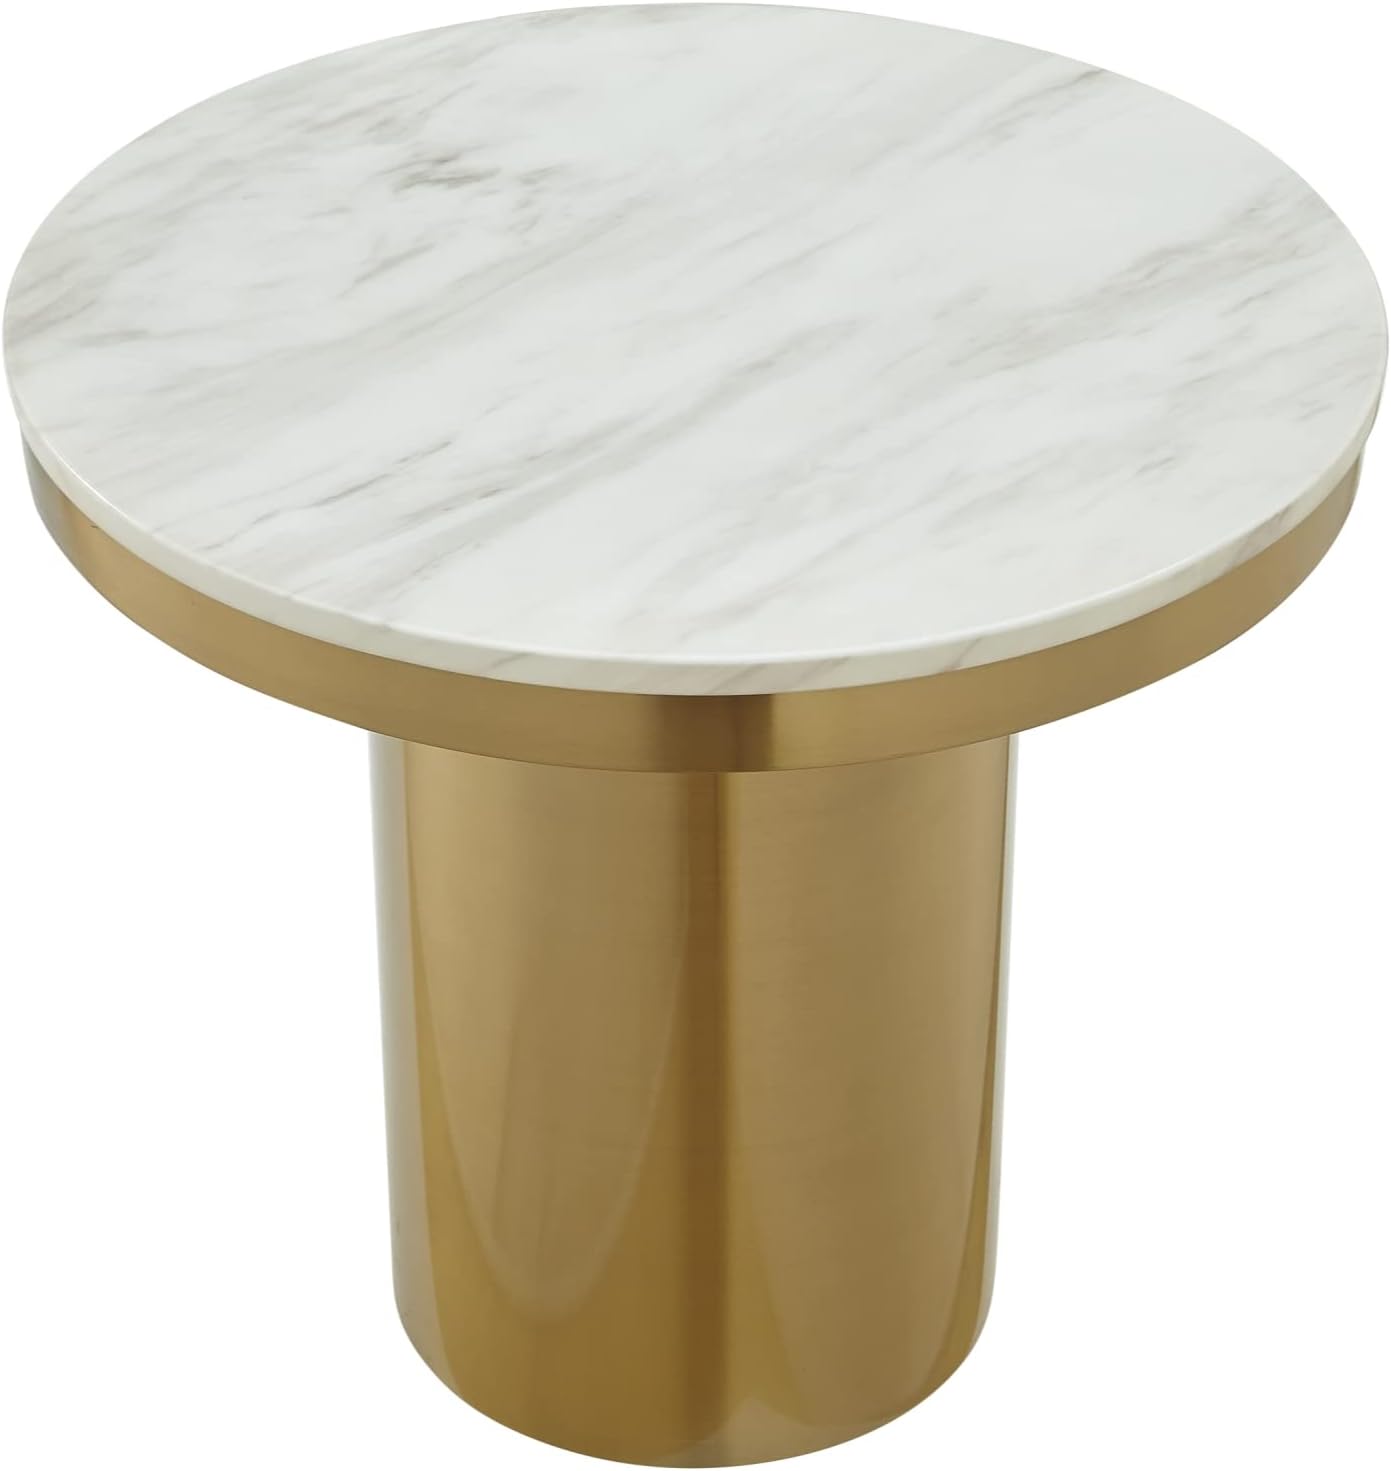 Callum Marble End Table Home, Office, Garden online marketplace